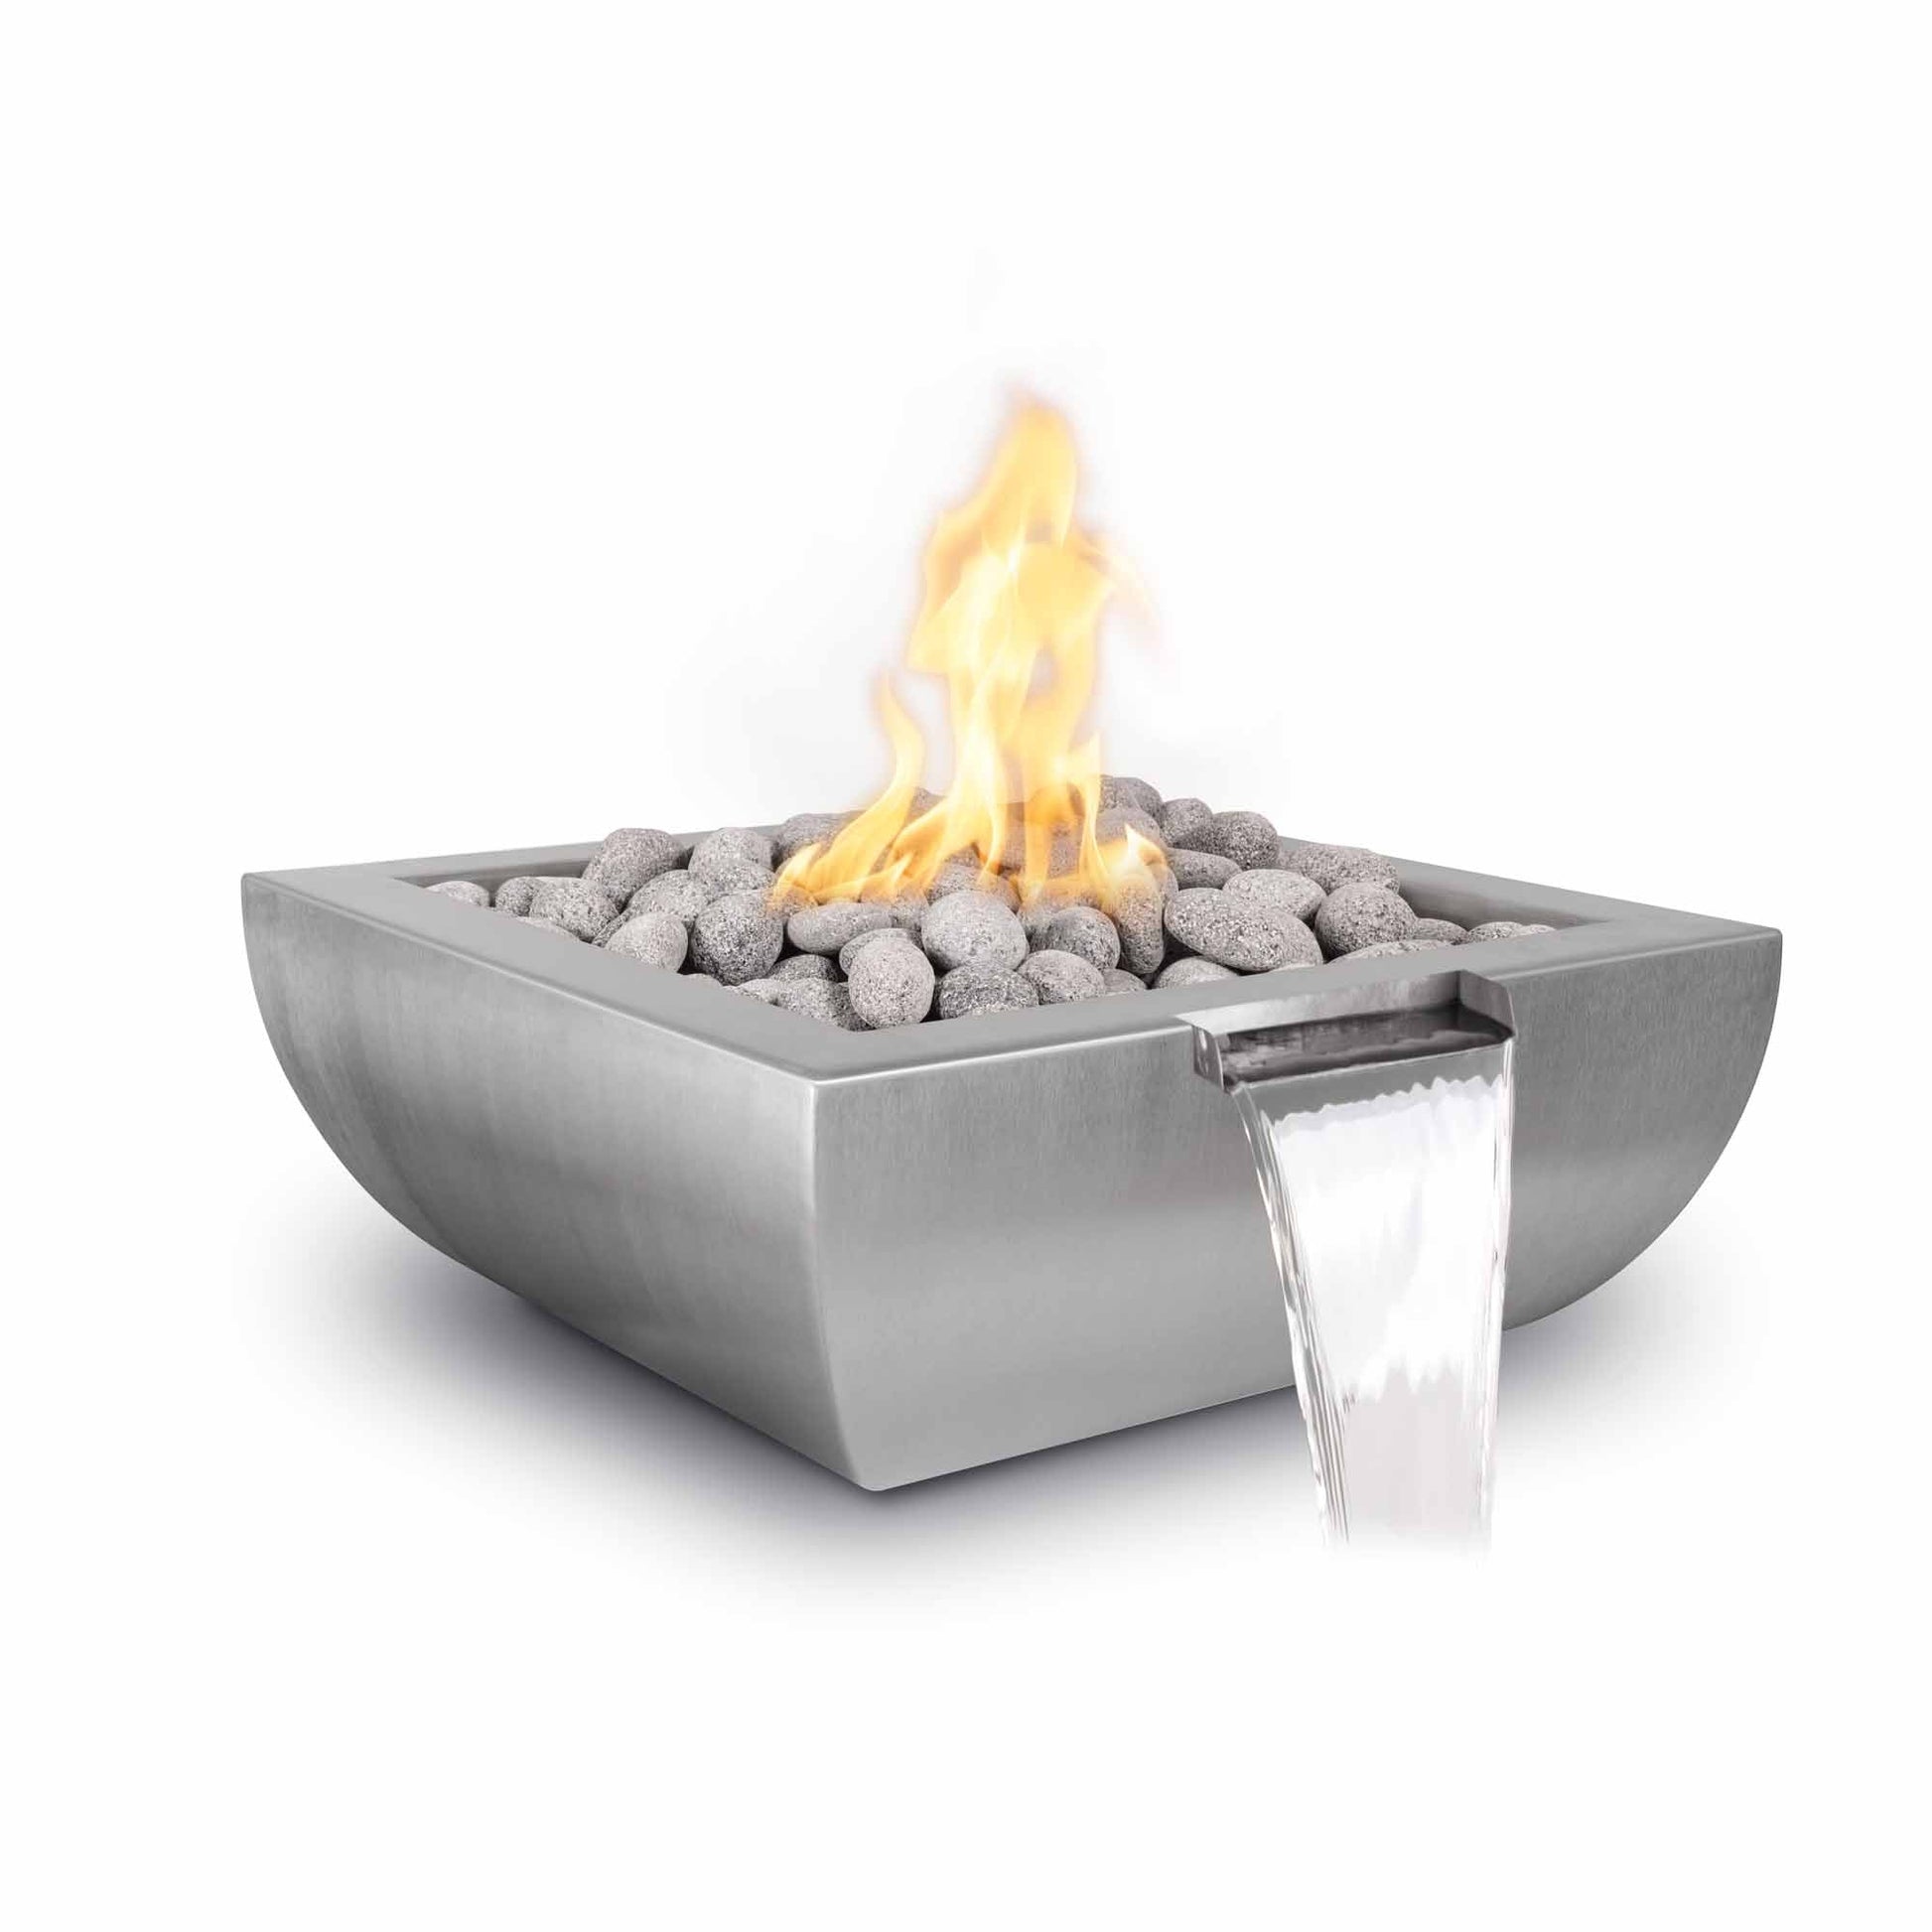 The Outdoor Plus Avalon 36" Java Powder Coated Metal Liquid Propane Fire & Water Bowl with Match Lit with Flame Sense Ignition